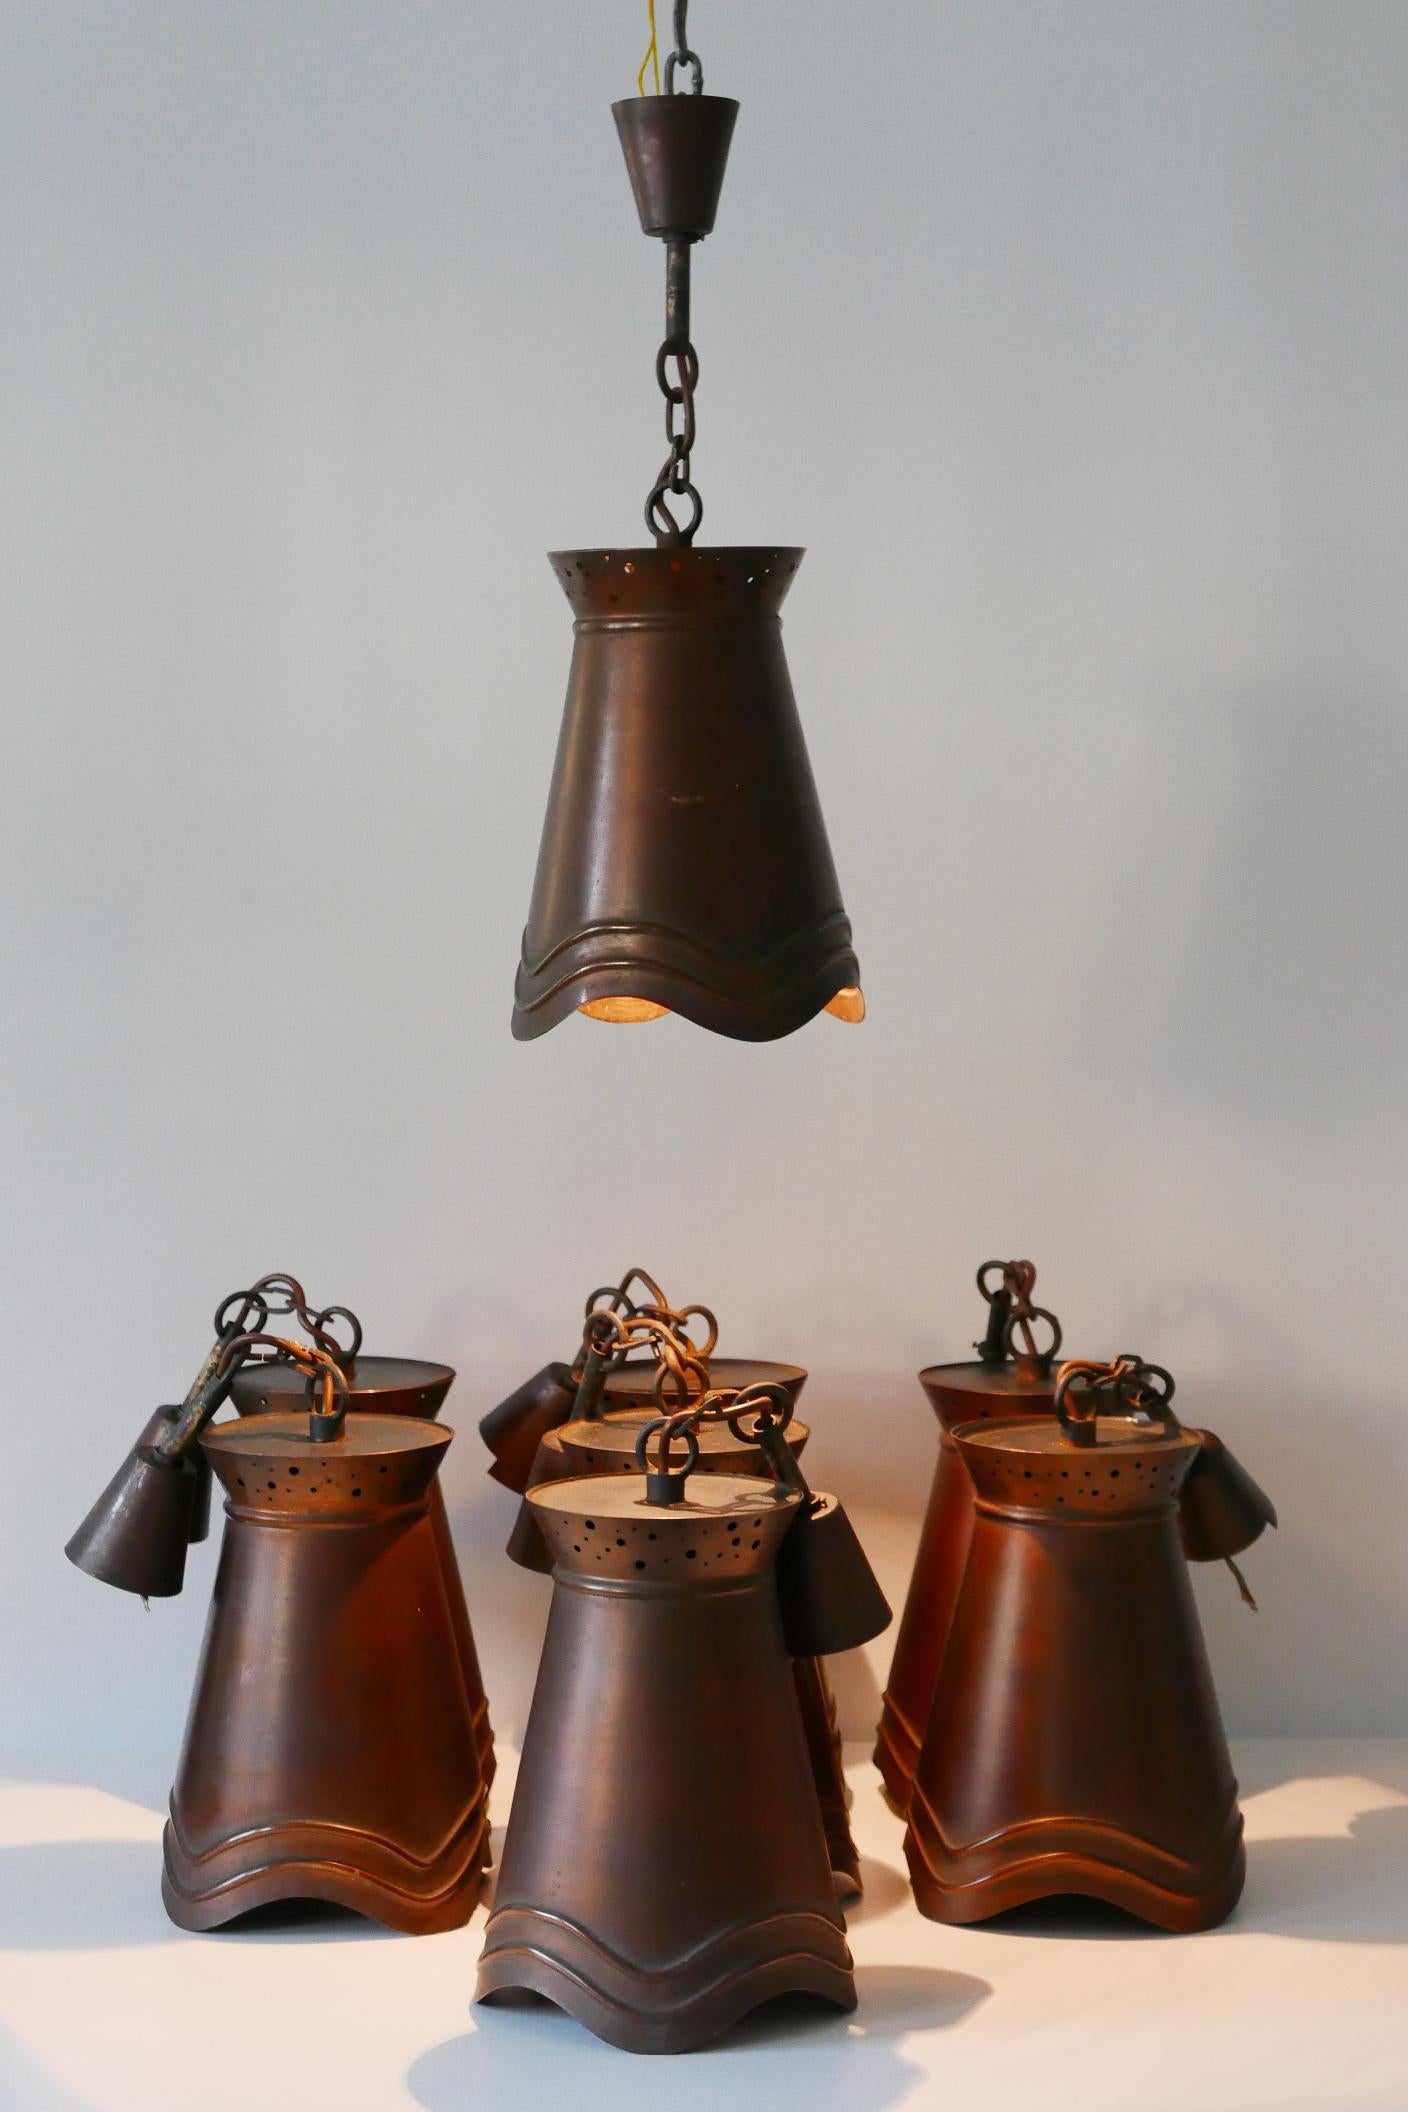 Mid-Century Modern Copper Pendant Lamps or Hanging Lights, Germany, 1950s For Sale 9